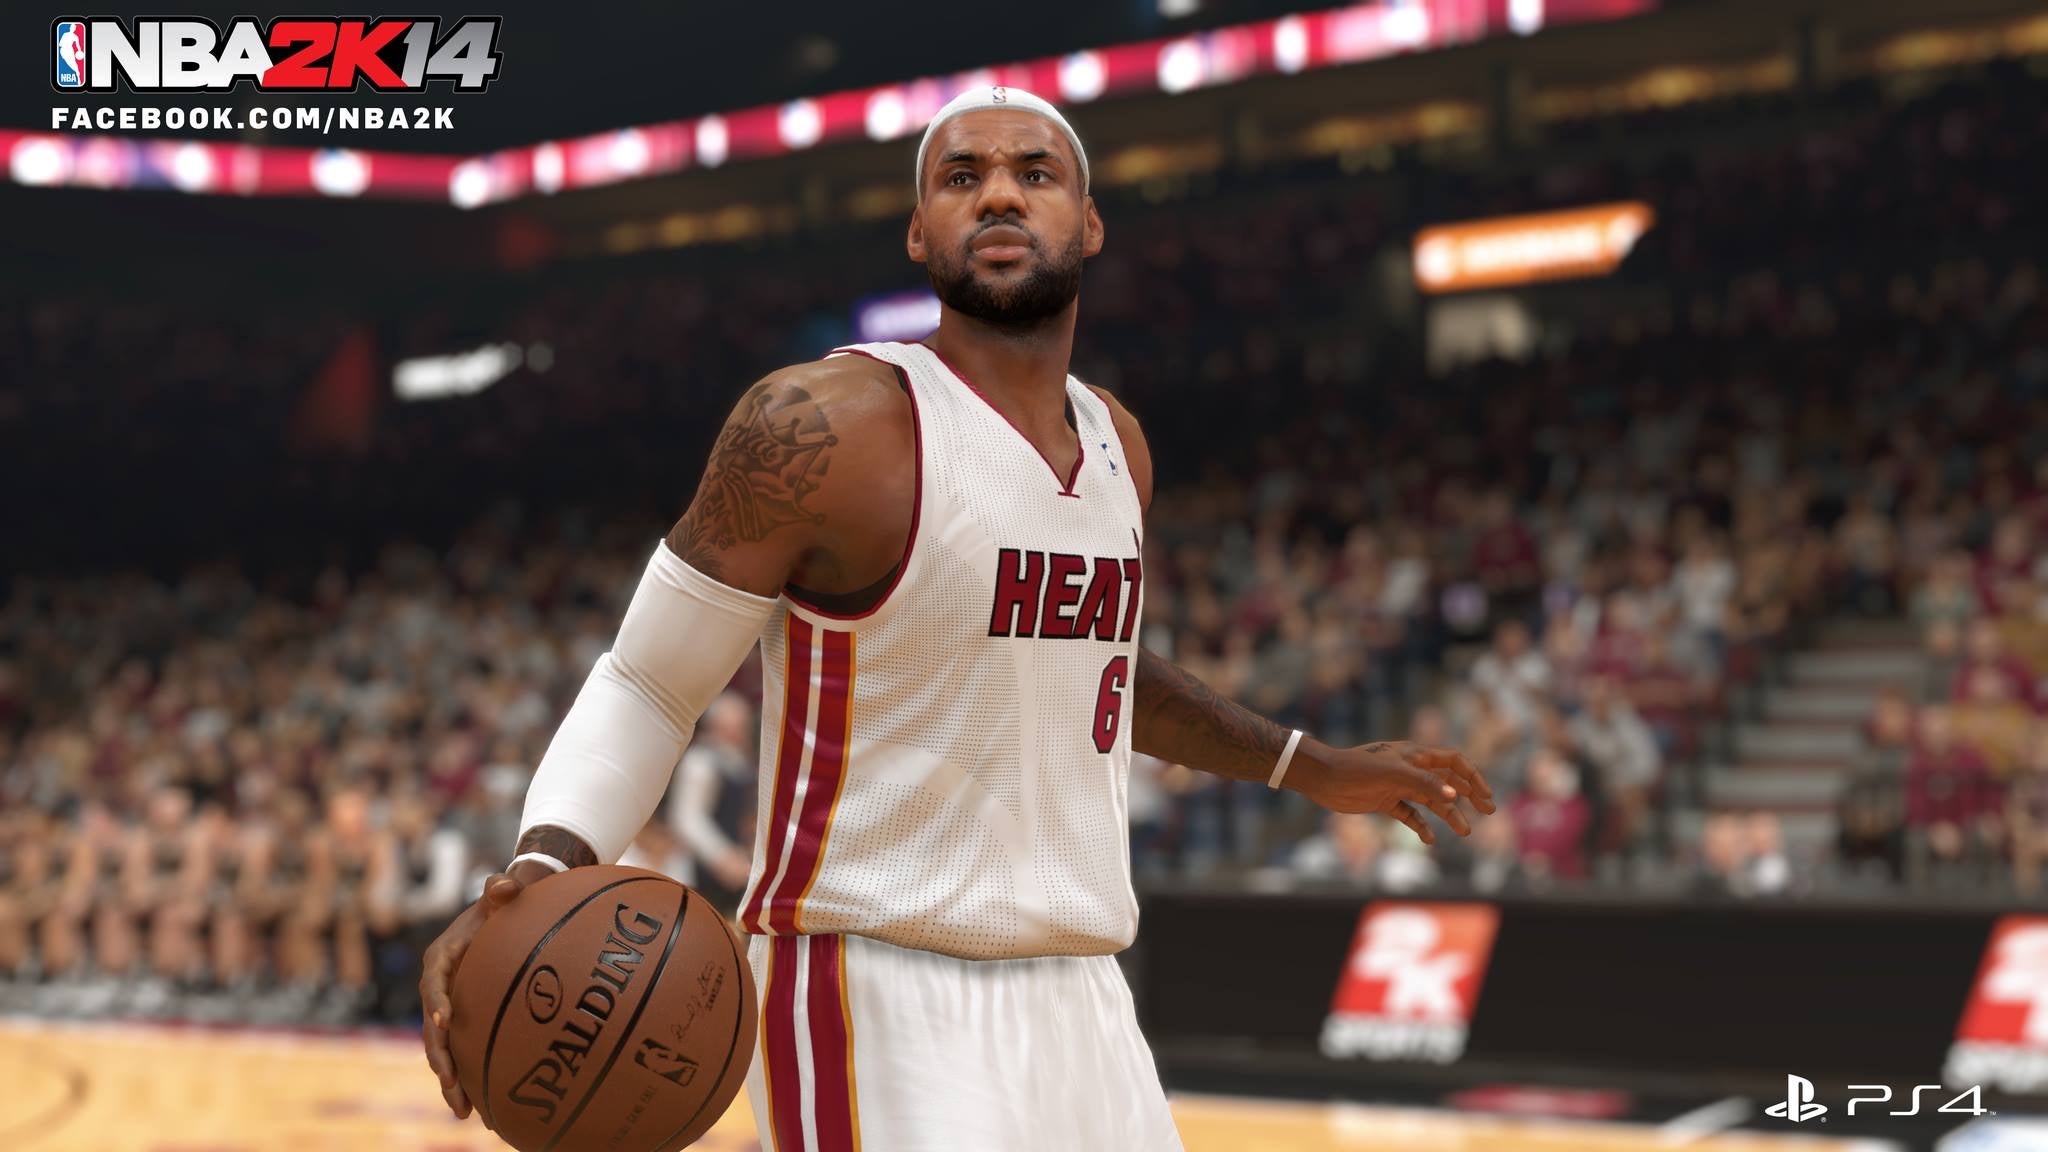 NBA 2K14 has been resurrected, and 2K has elected to extend its limited sup...